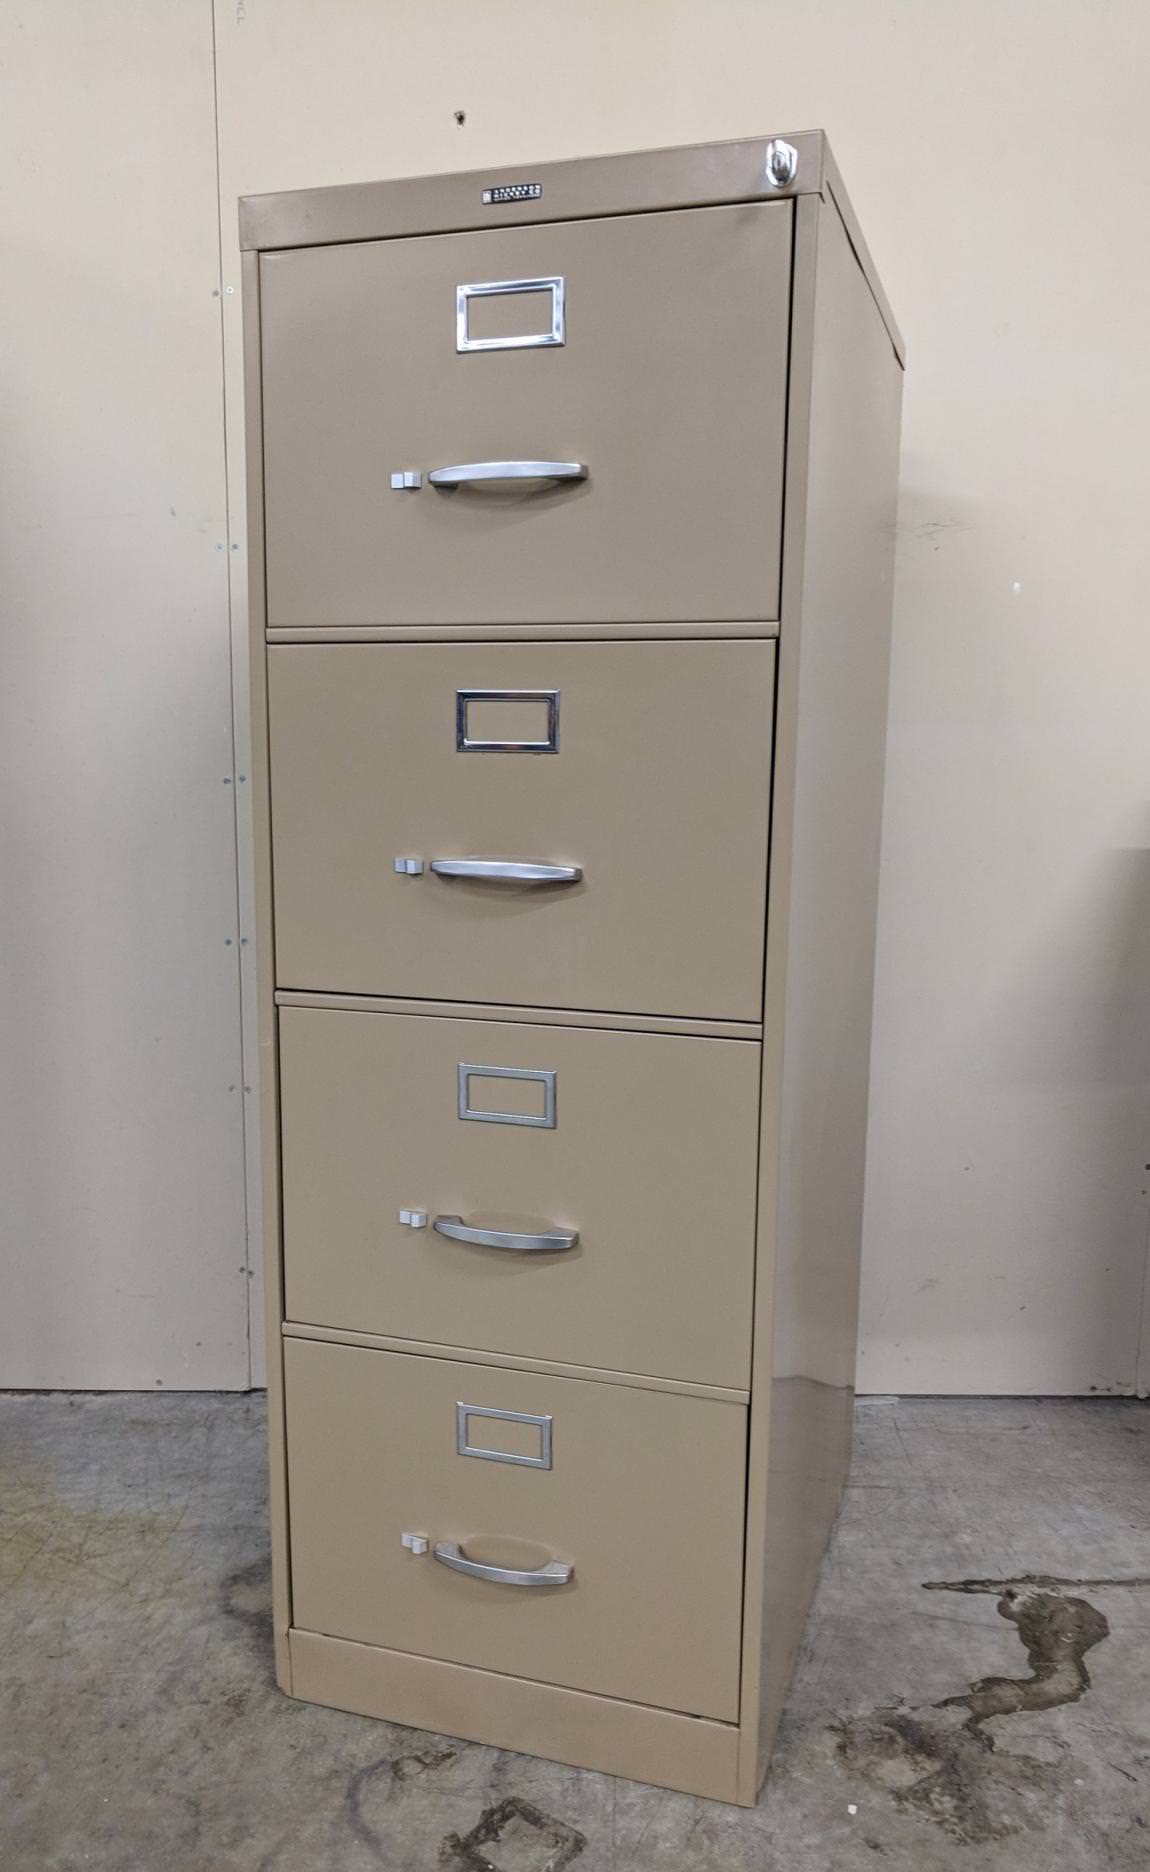 Tan Anderson Hickey 4 Drawer Vertical Legal File Cabinet by